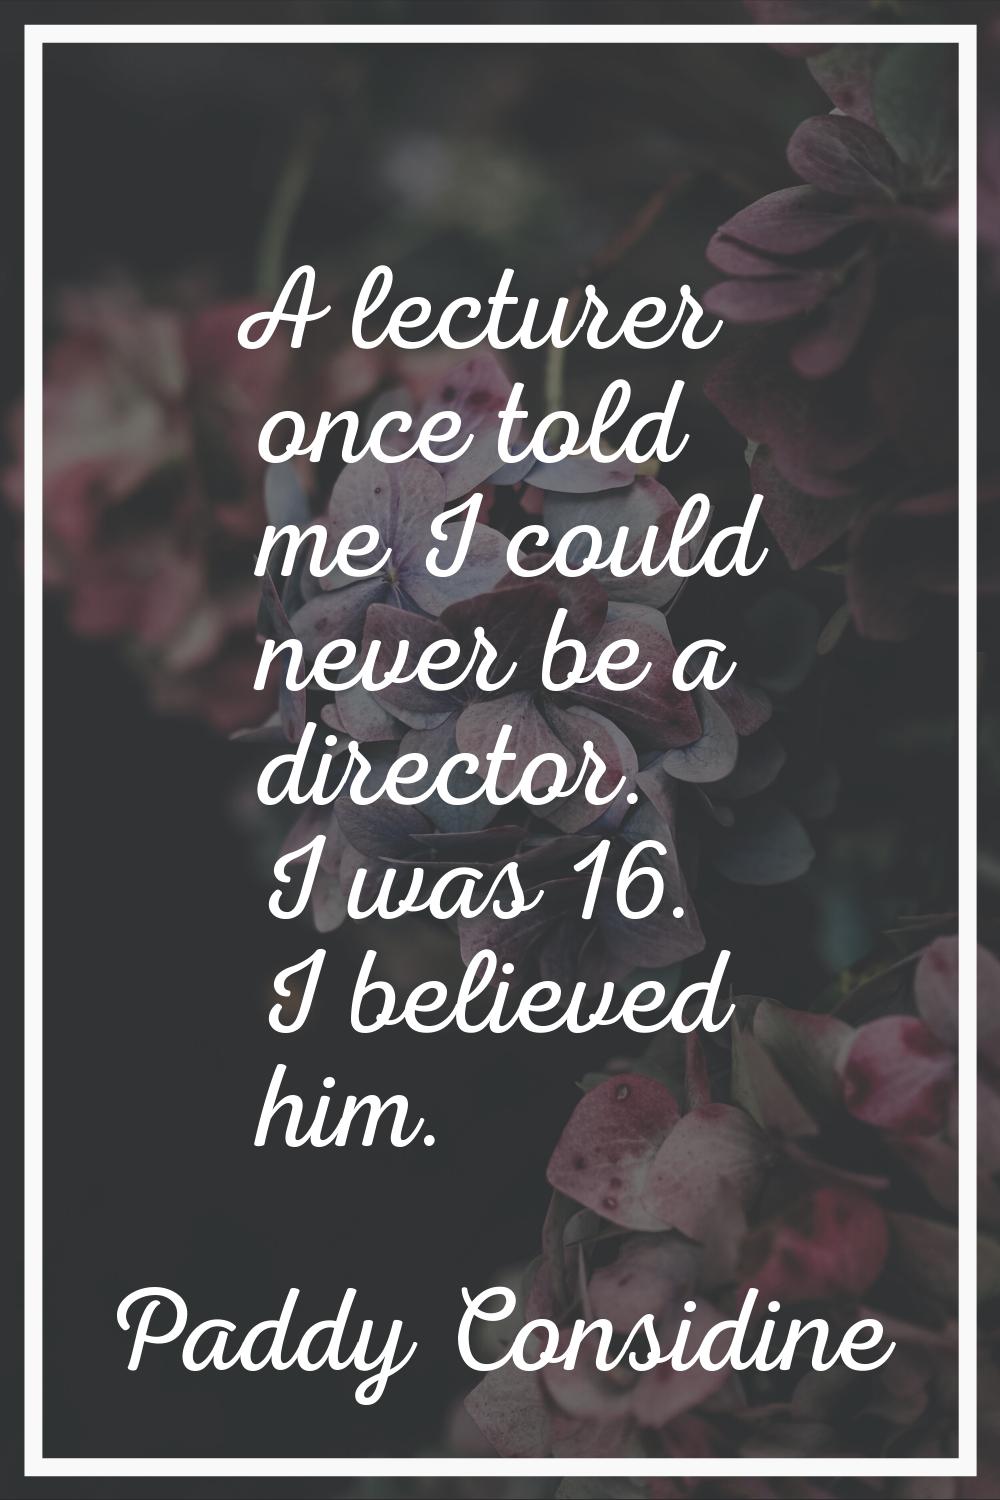 A lecturer once told me I could never be a director. I was 16. I believed him.